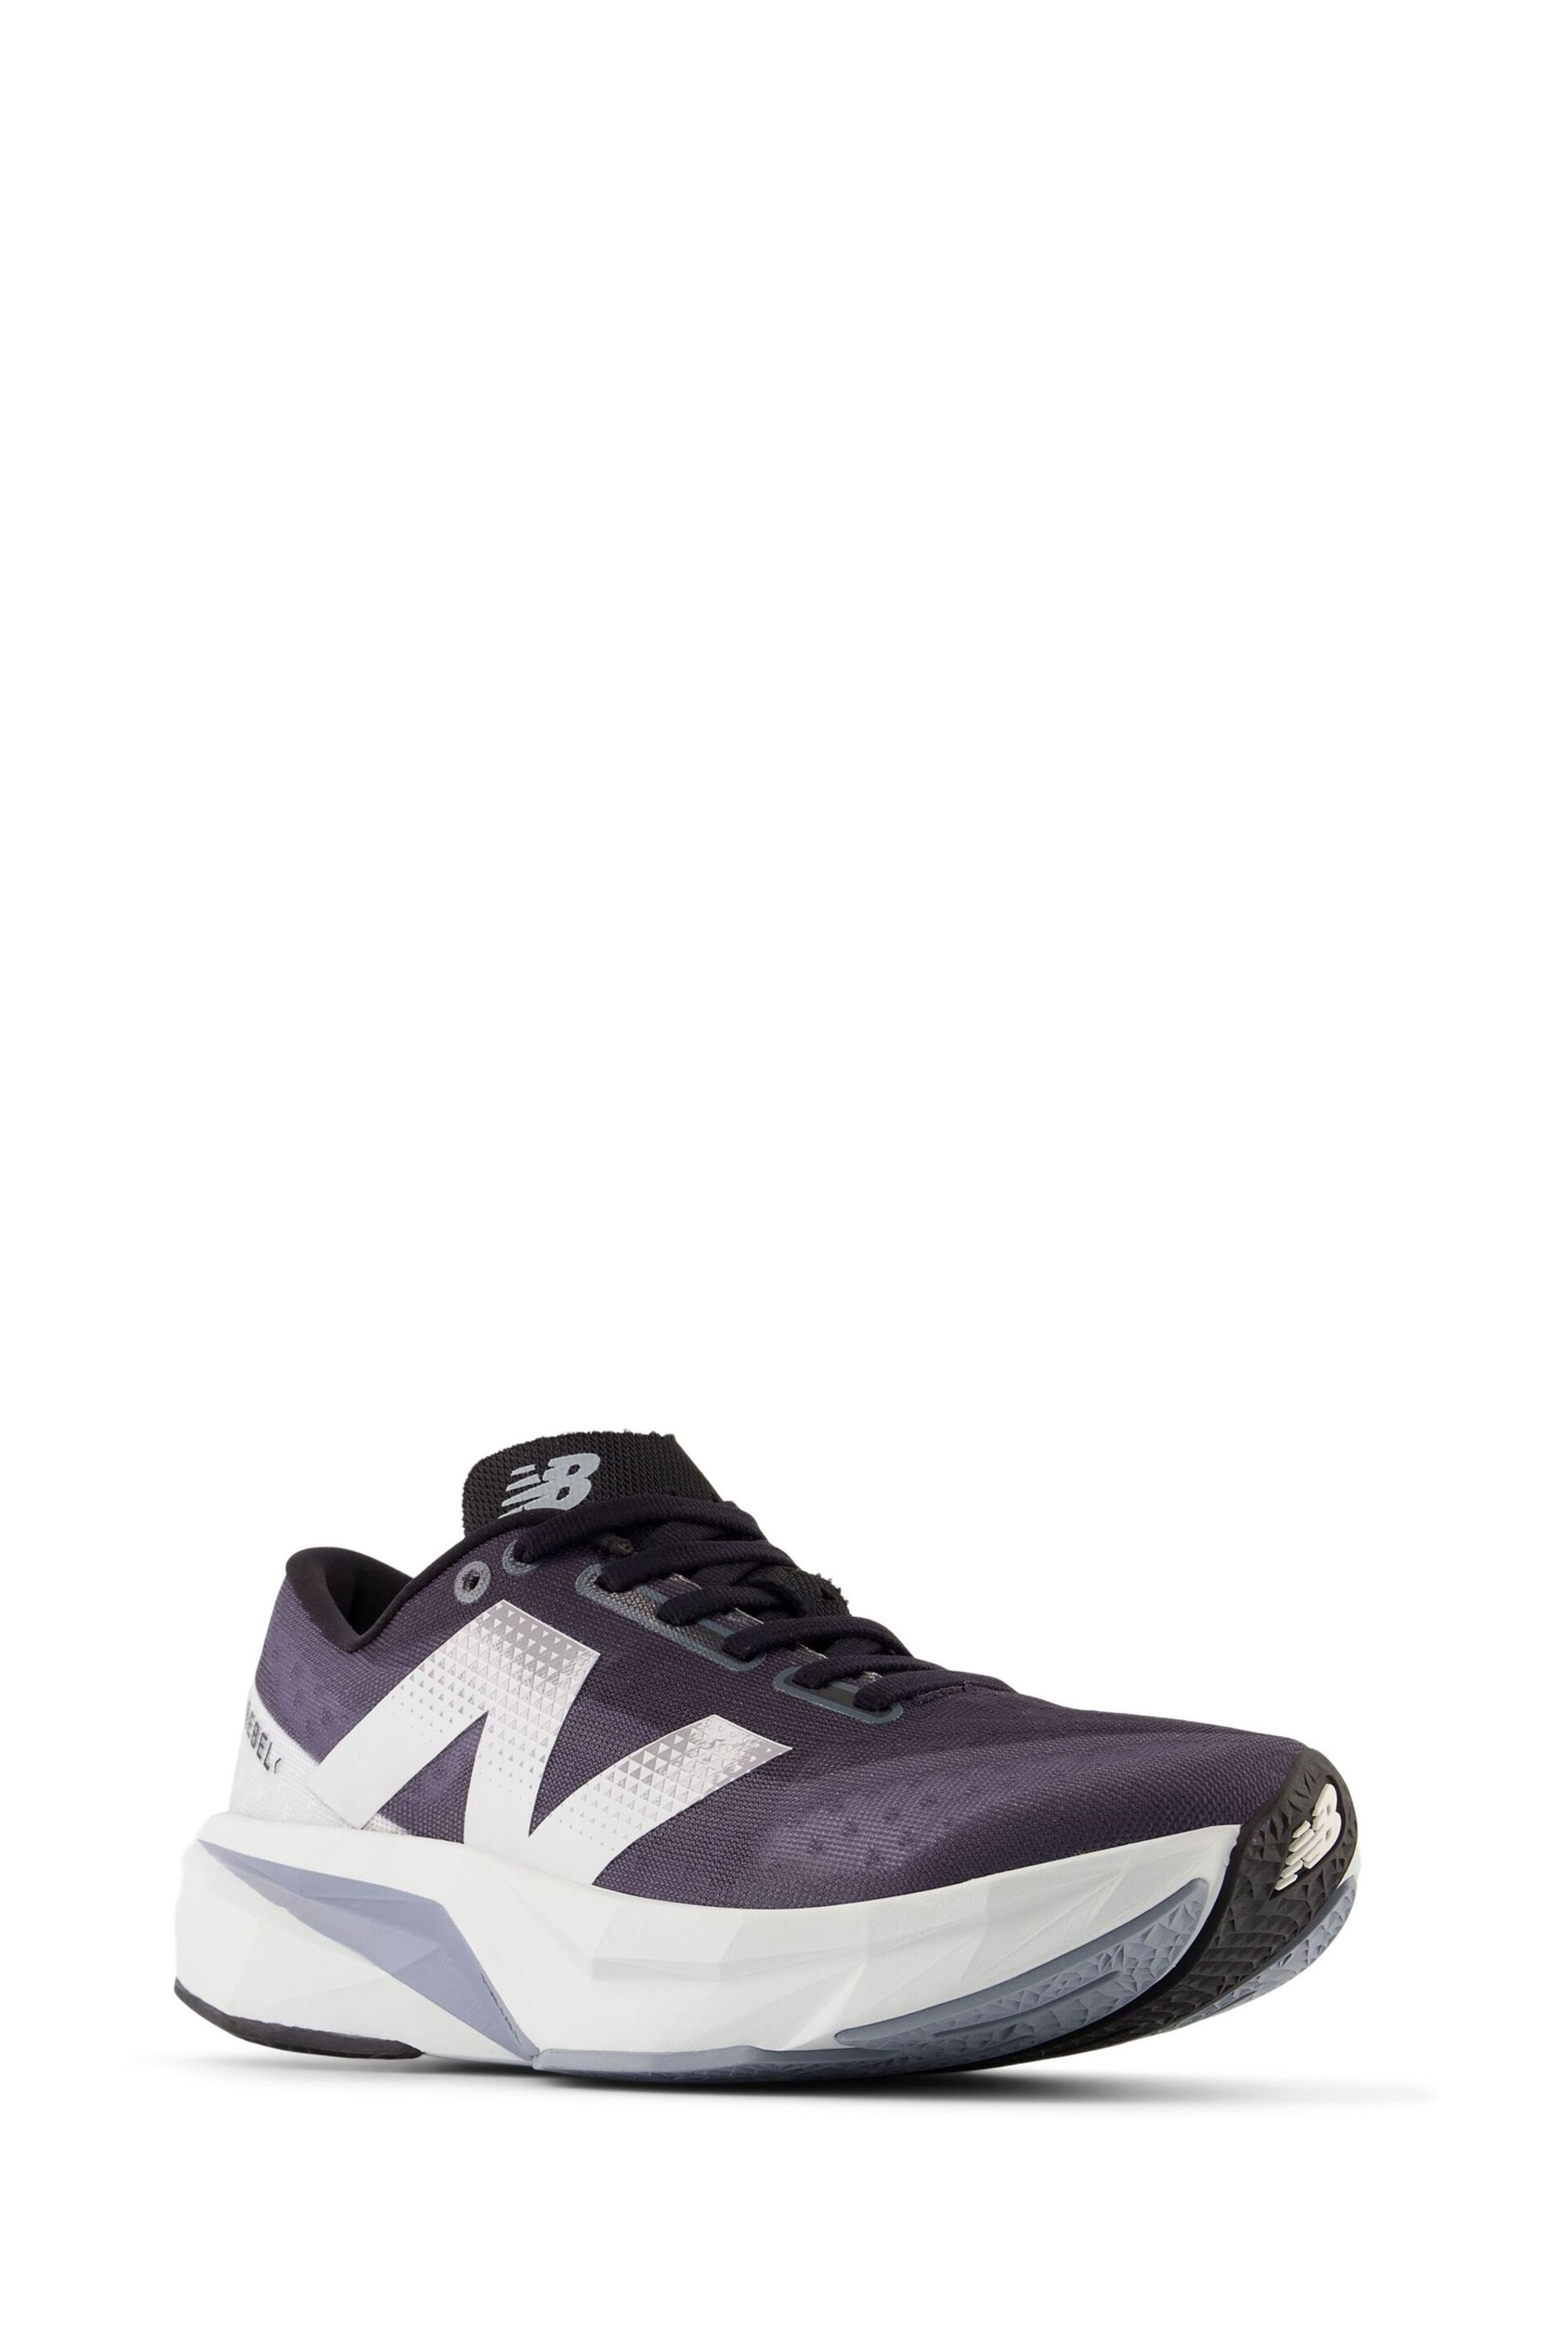 New Balance Grey Womens Fuelcell Rebel Trainers - Image 6 of 10